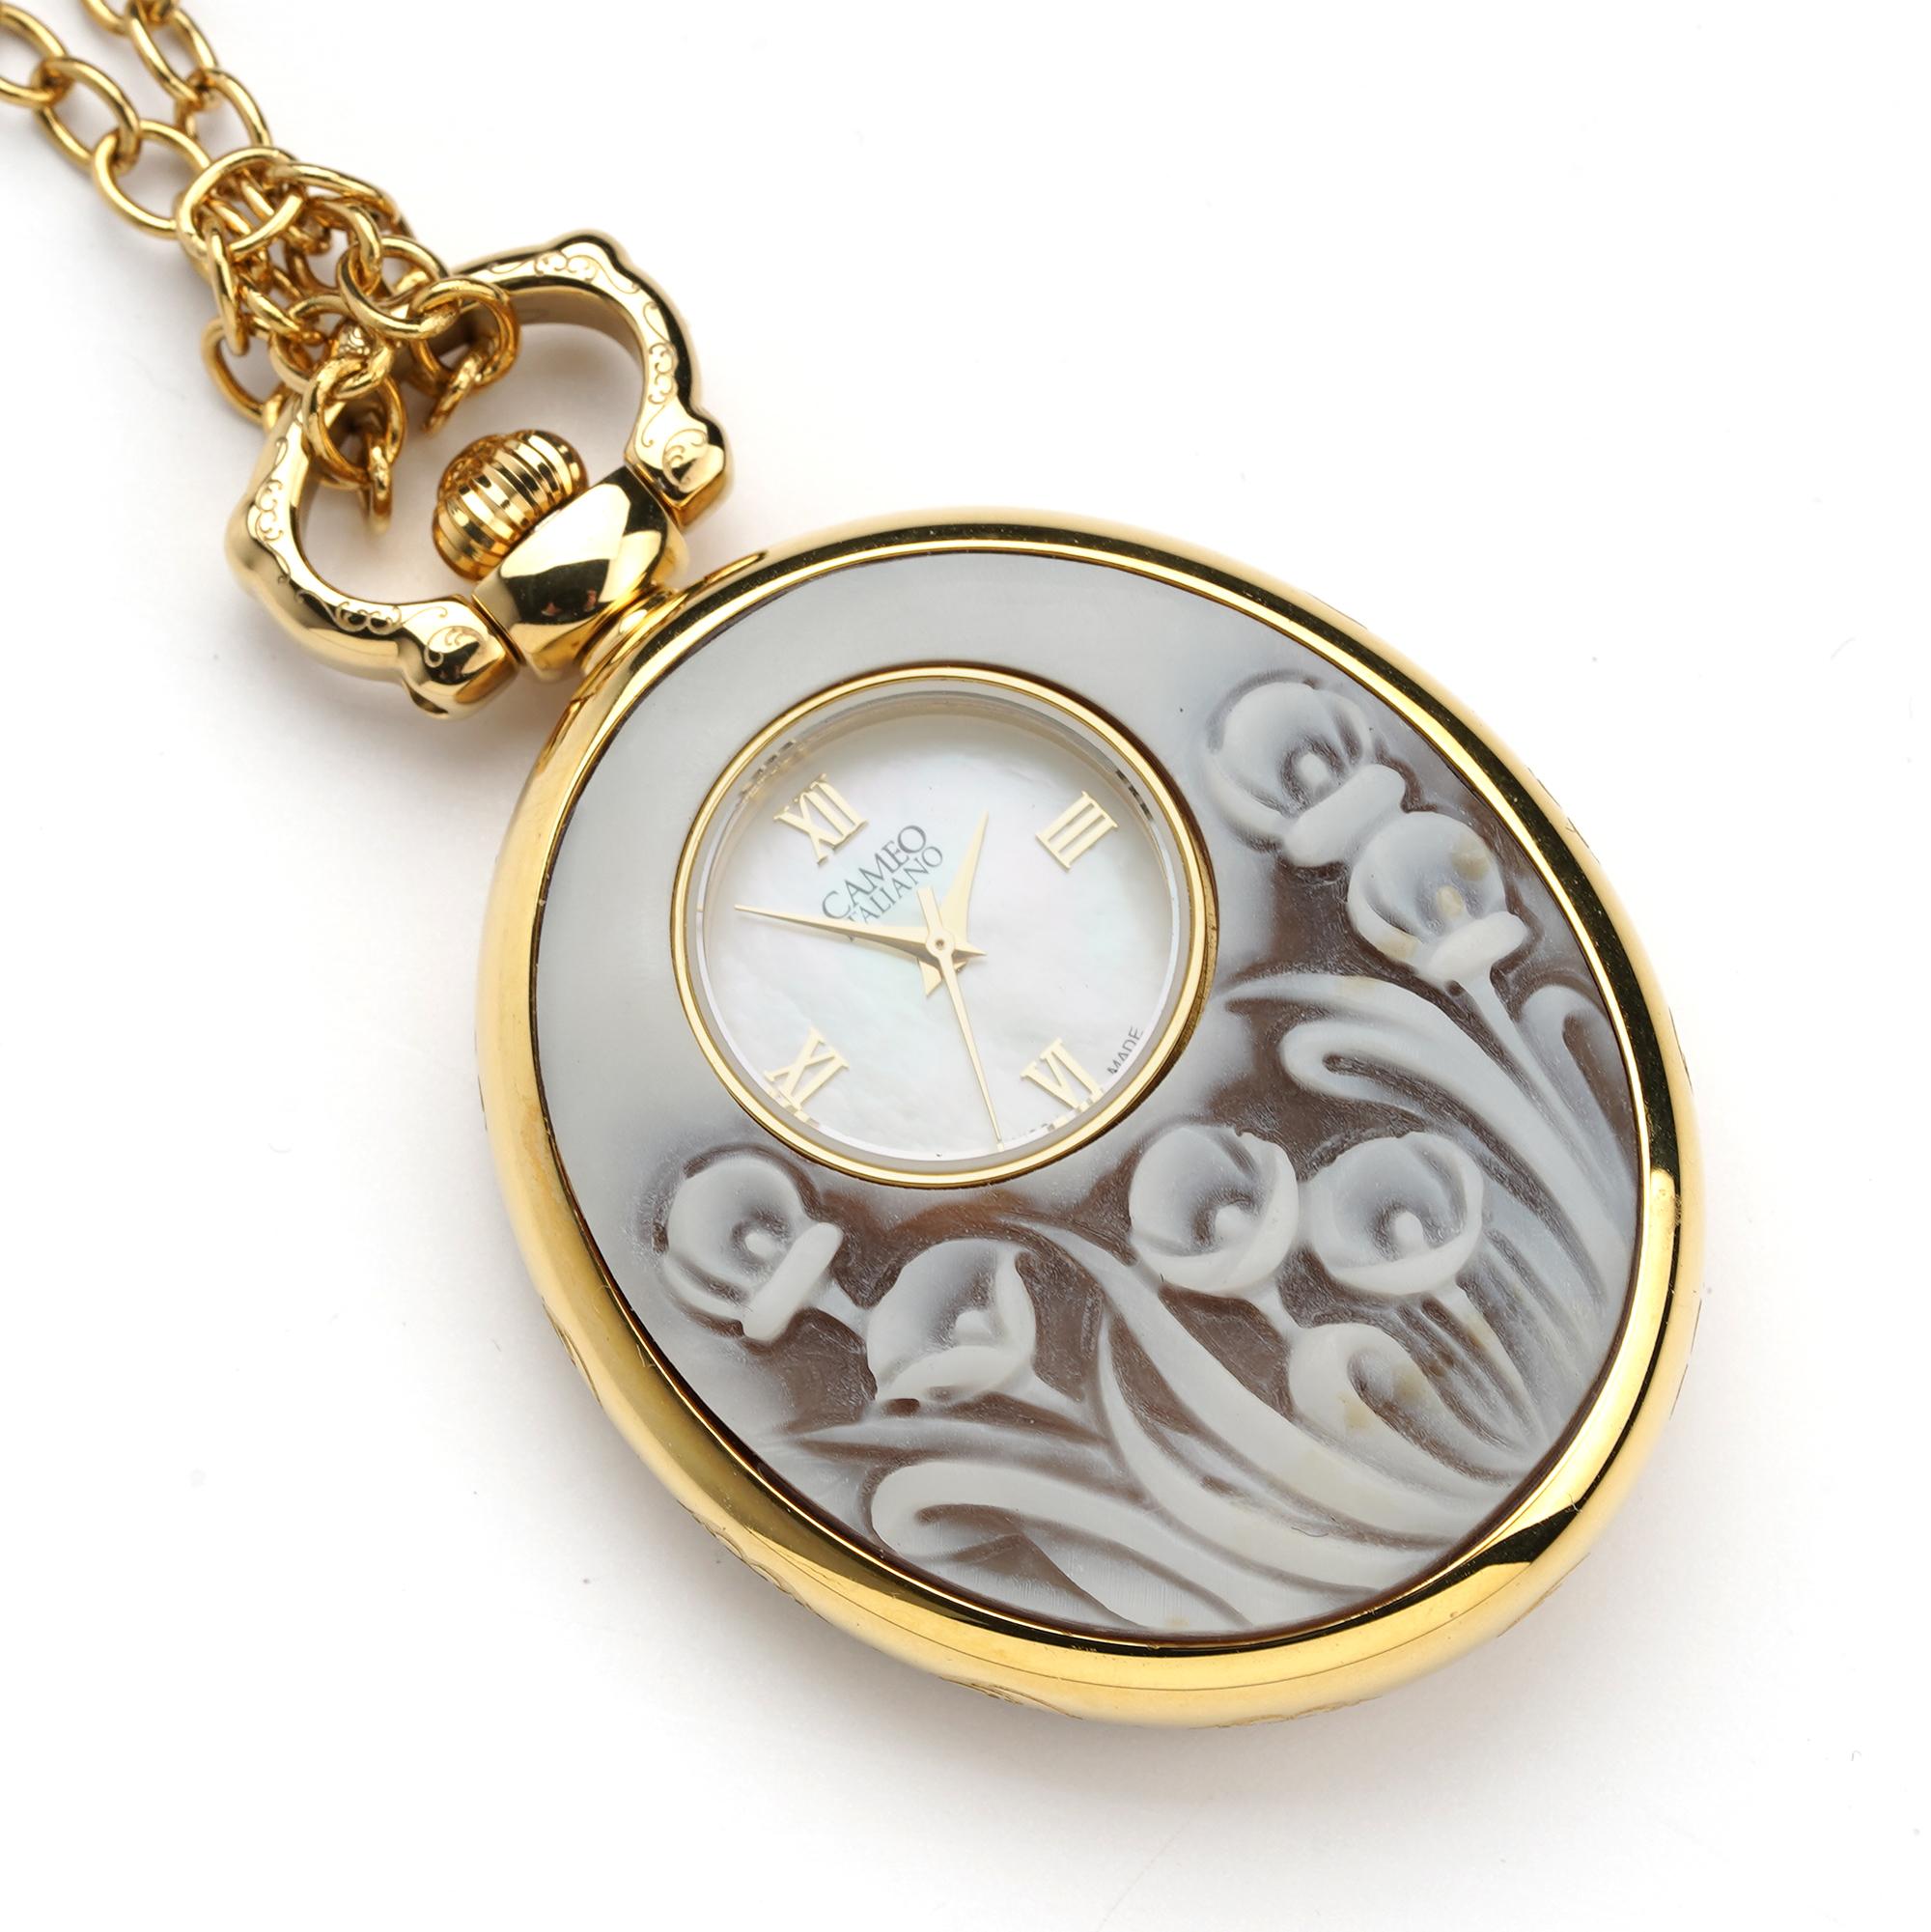 Stainless steel Pendant  Watch with Sea Shell Cameos PVD treated with 45 mm Sea Shell Cameos.  Fully handcarved tulips on a sea shell cameo set on   Stainless steel Pendant  Watch with  PVD treated . Mother of perl dial.  Carvings are performed by